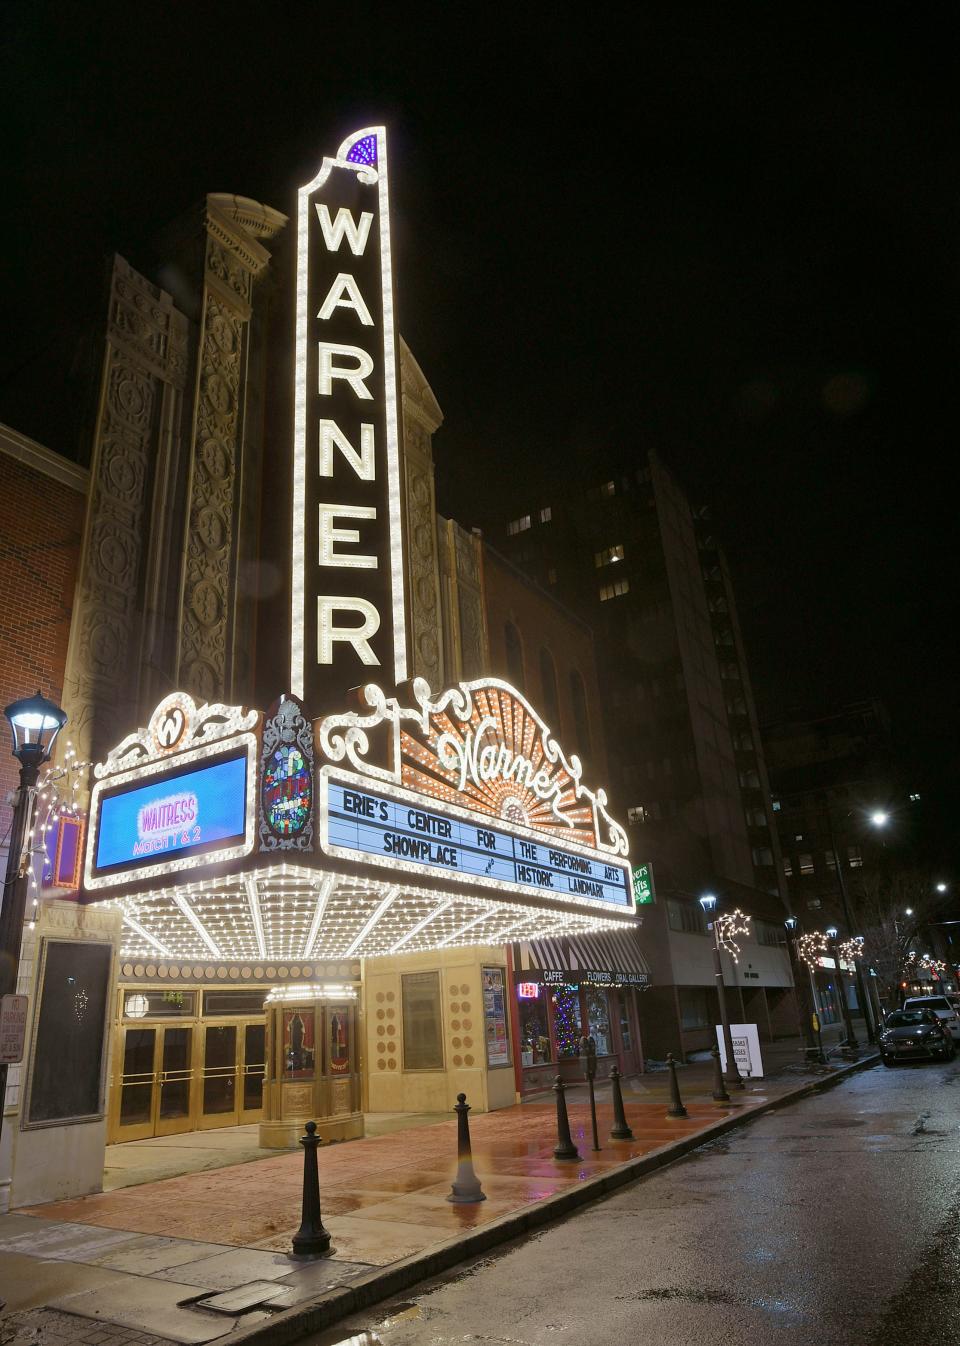 After more than 40 years, the marquee on the front of the Warner Theatre, 811 State St. in downtown Erie, was re-lit in December. The marquee and the vertical u0022Warneru0022 signs are filled with 6,910 LED lights, cost $700,000 and is a replica of the original marquee, which was part of the iconic art deco theater, which opened in 1931.